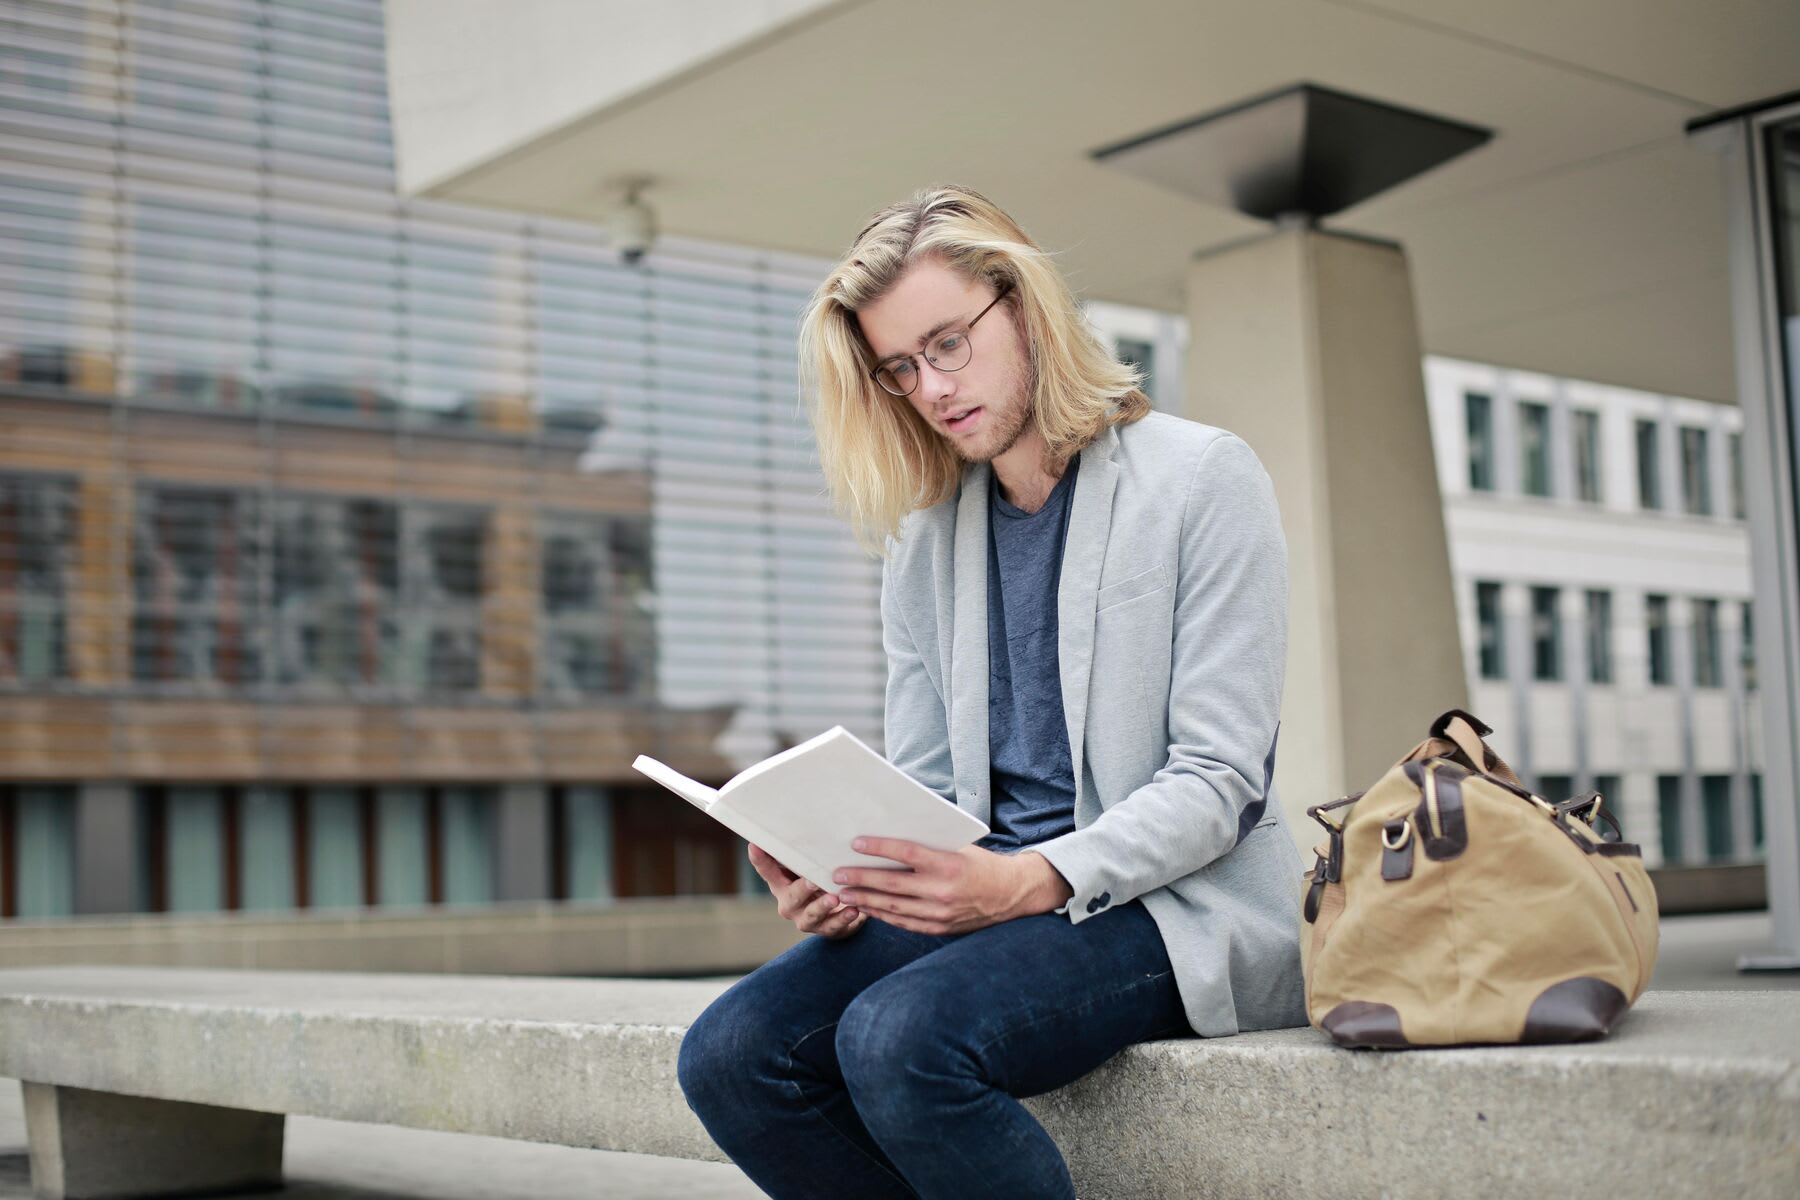 Man with long blonde hair and a sports coat sitting on a concrete wall reading a book outside